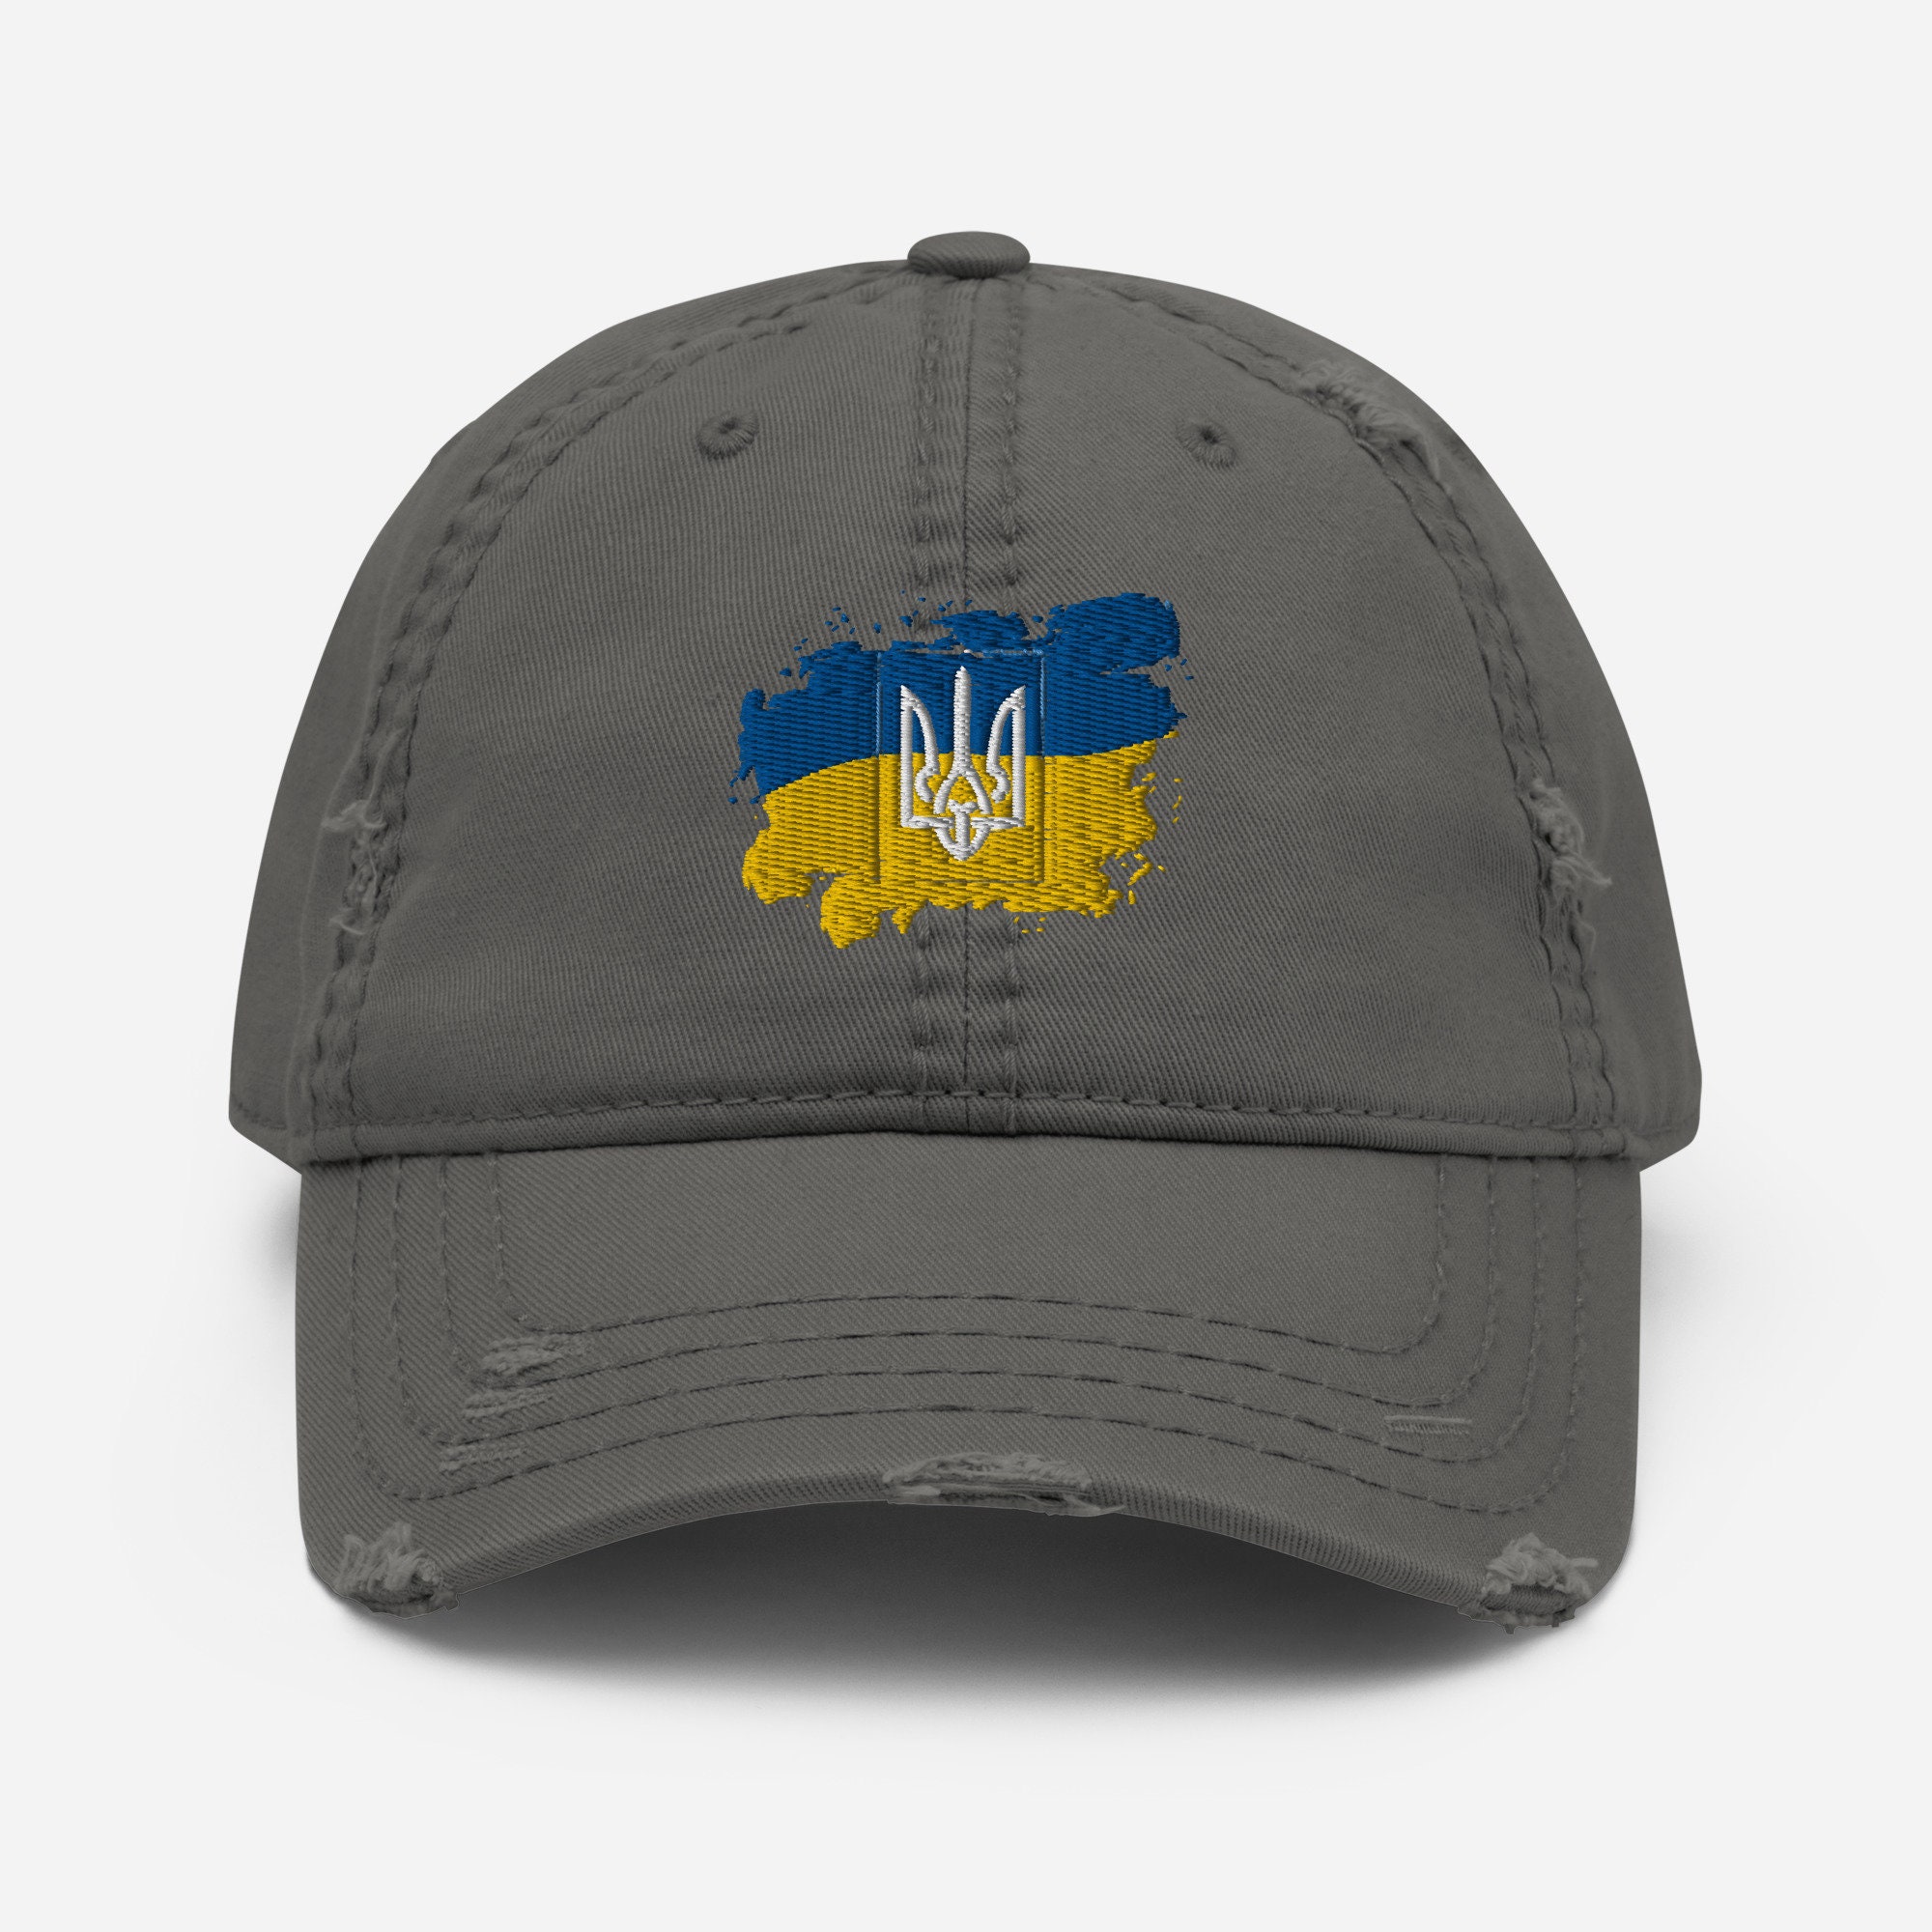 Support Ukraine Protest War In Baseball Cap Father's Day Embroidered Hat